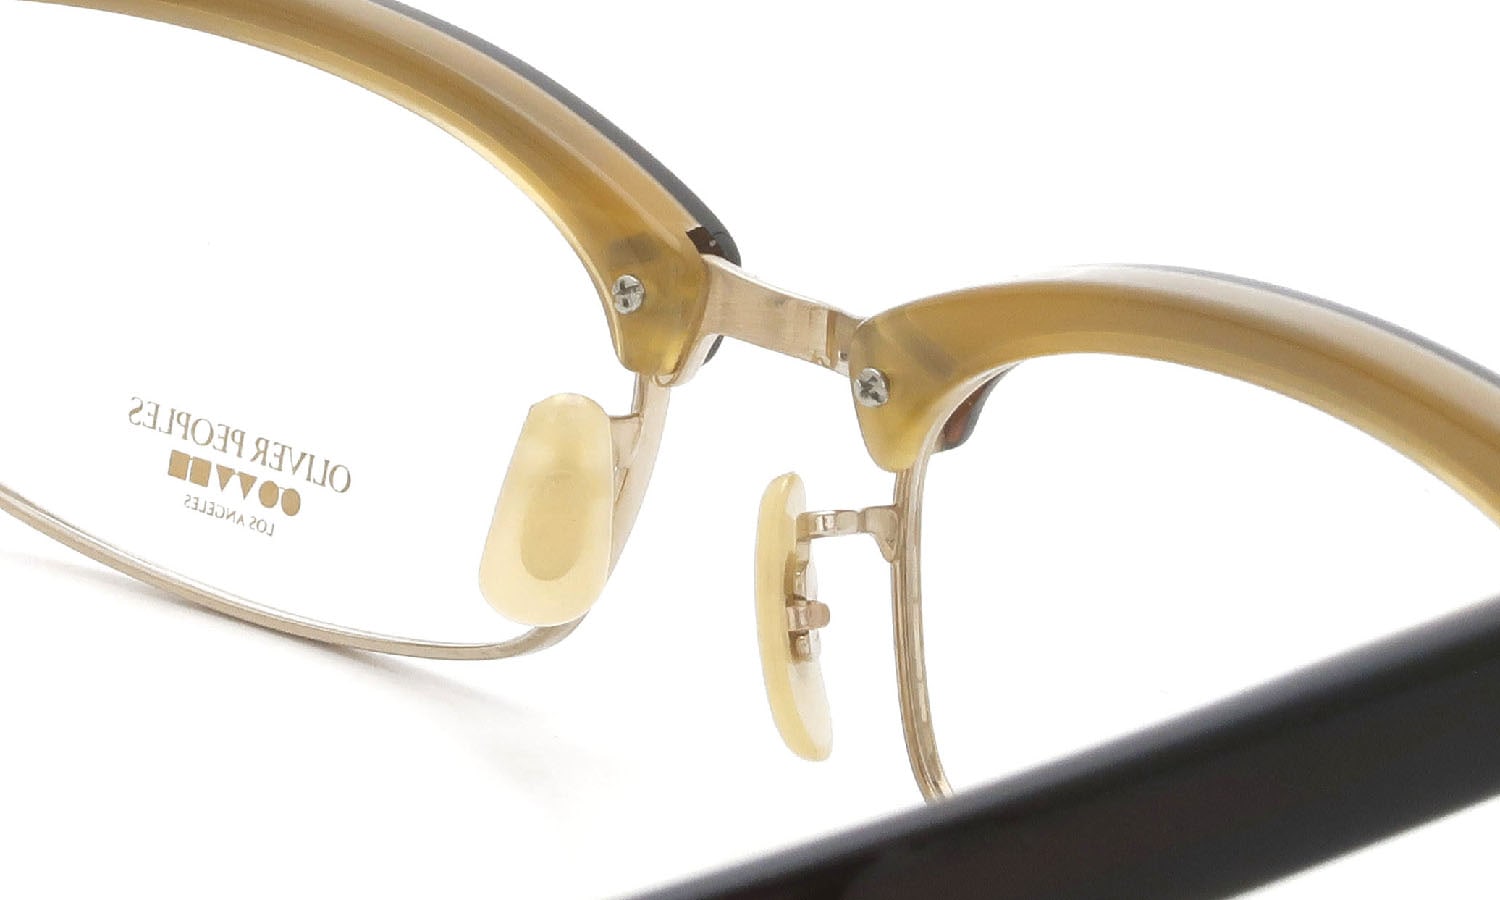 OLIVER PEOPLES  Ruscha MN #001